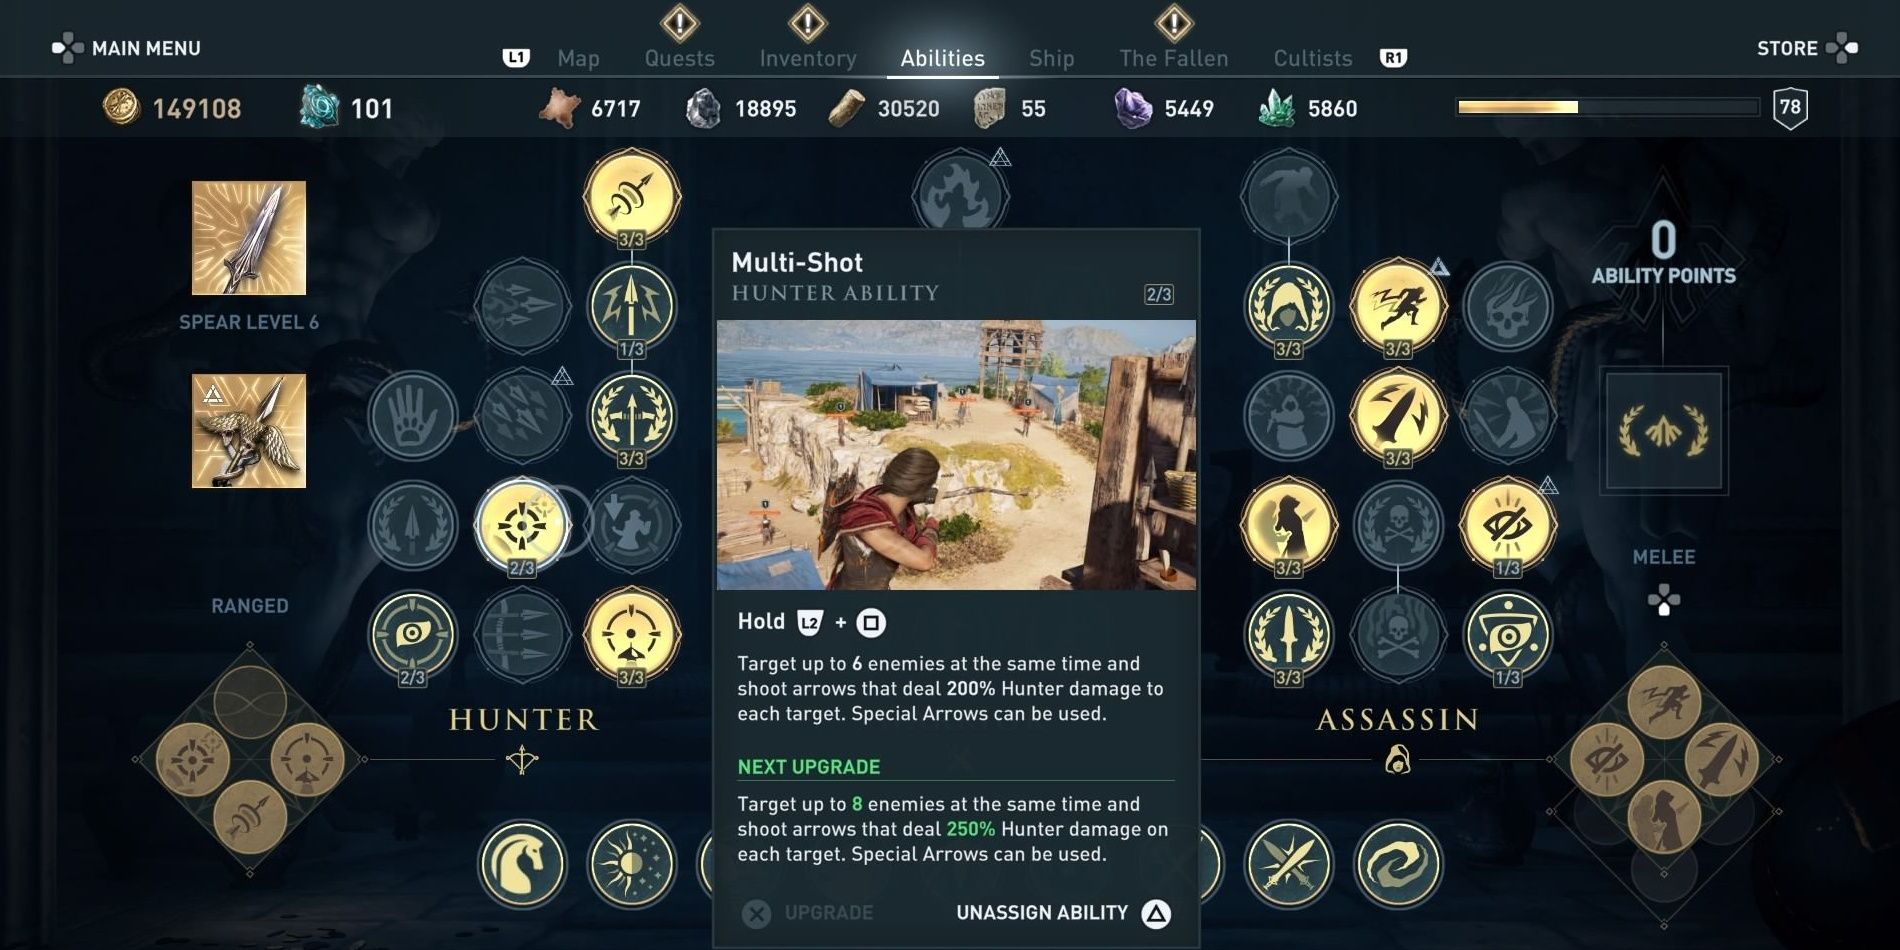 The Best Abilities In Assassin's Creed: Odyssey